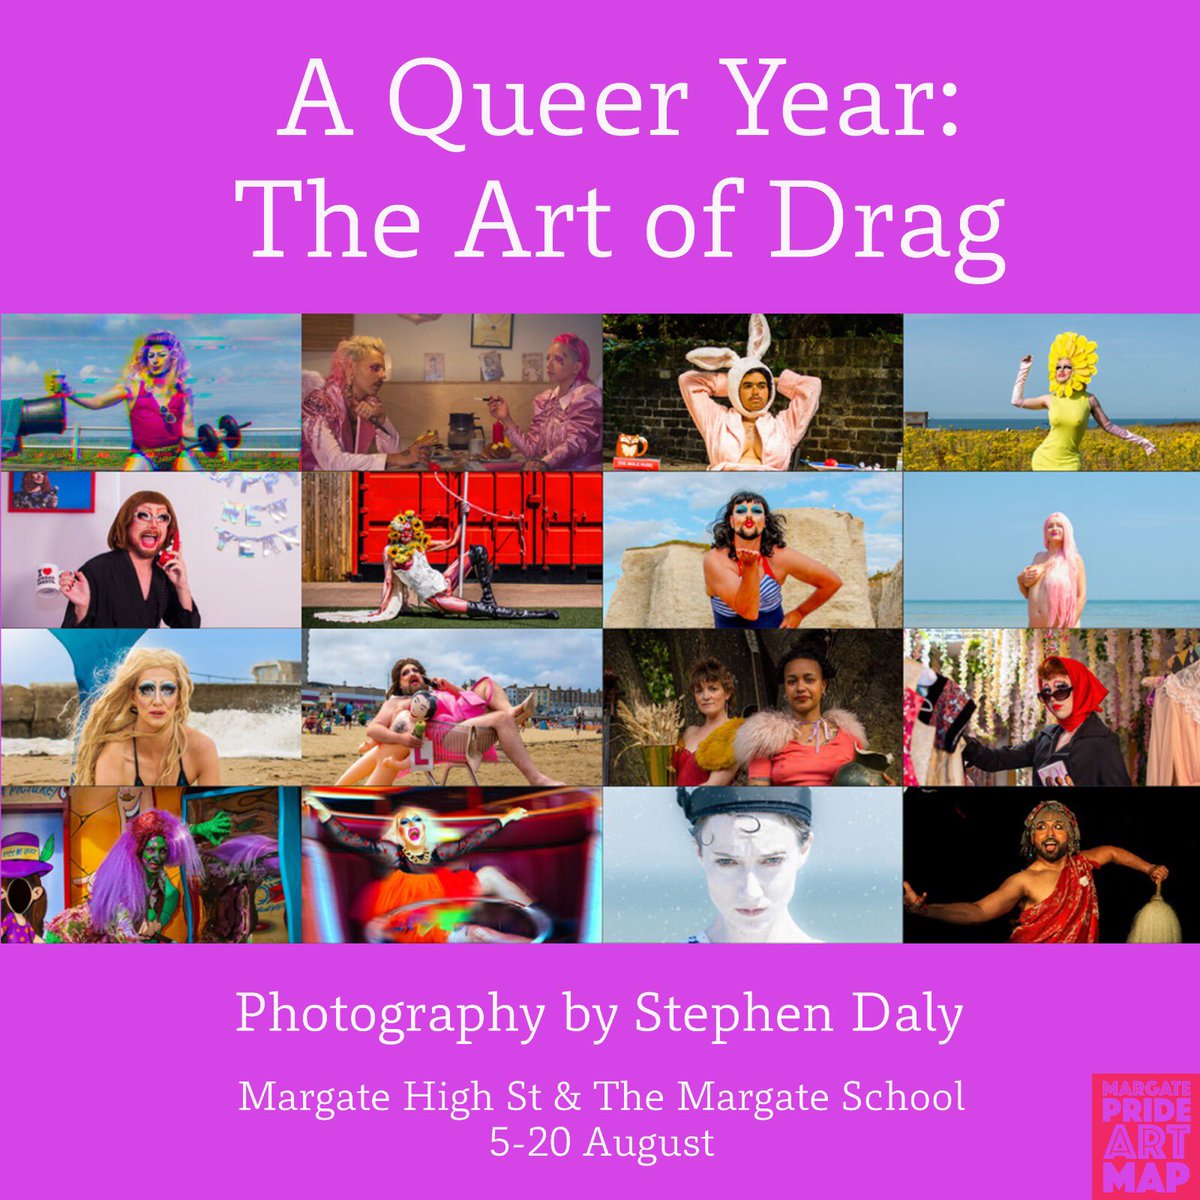 I have an exhibition on Margate High St for two weeks featuring 18 local queer artists x